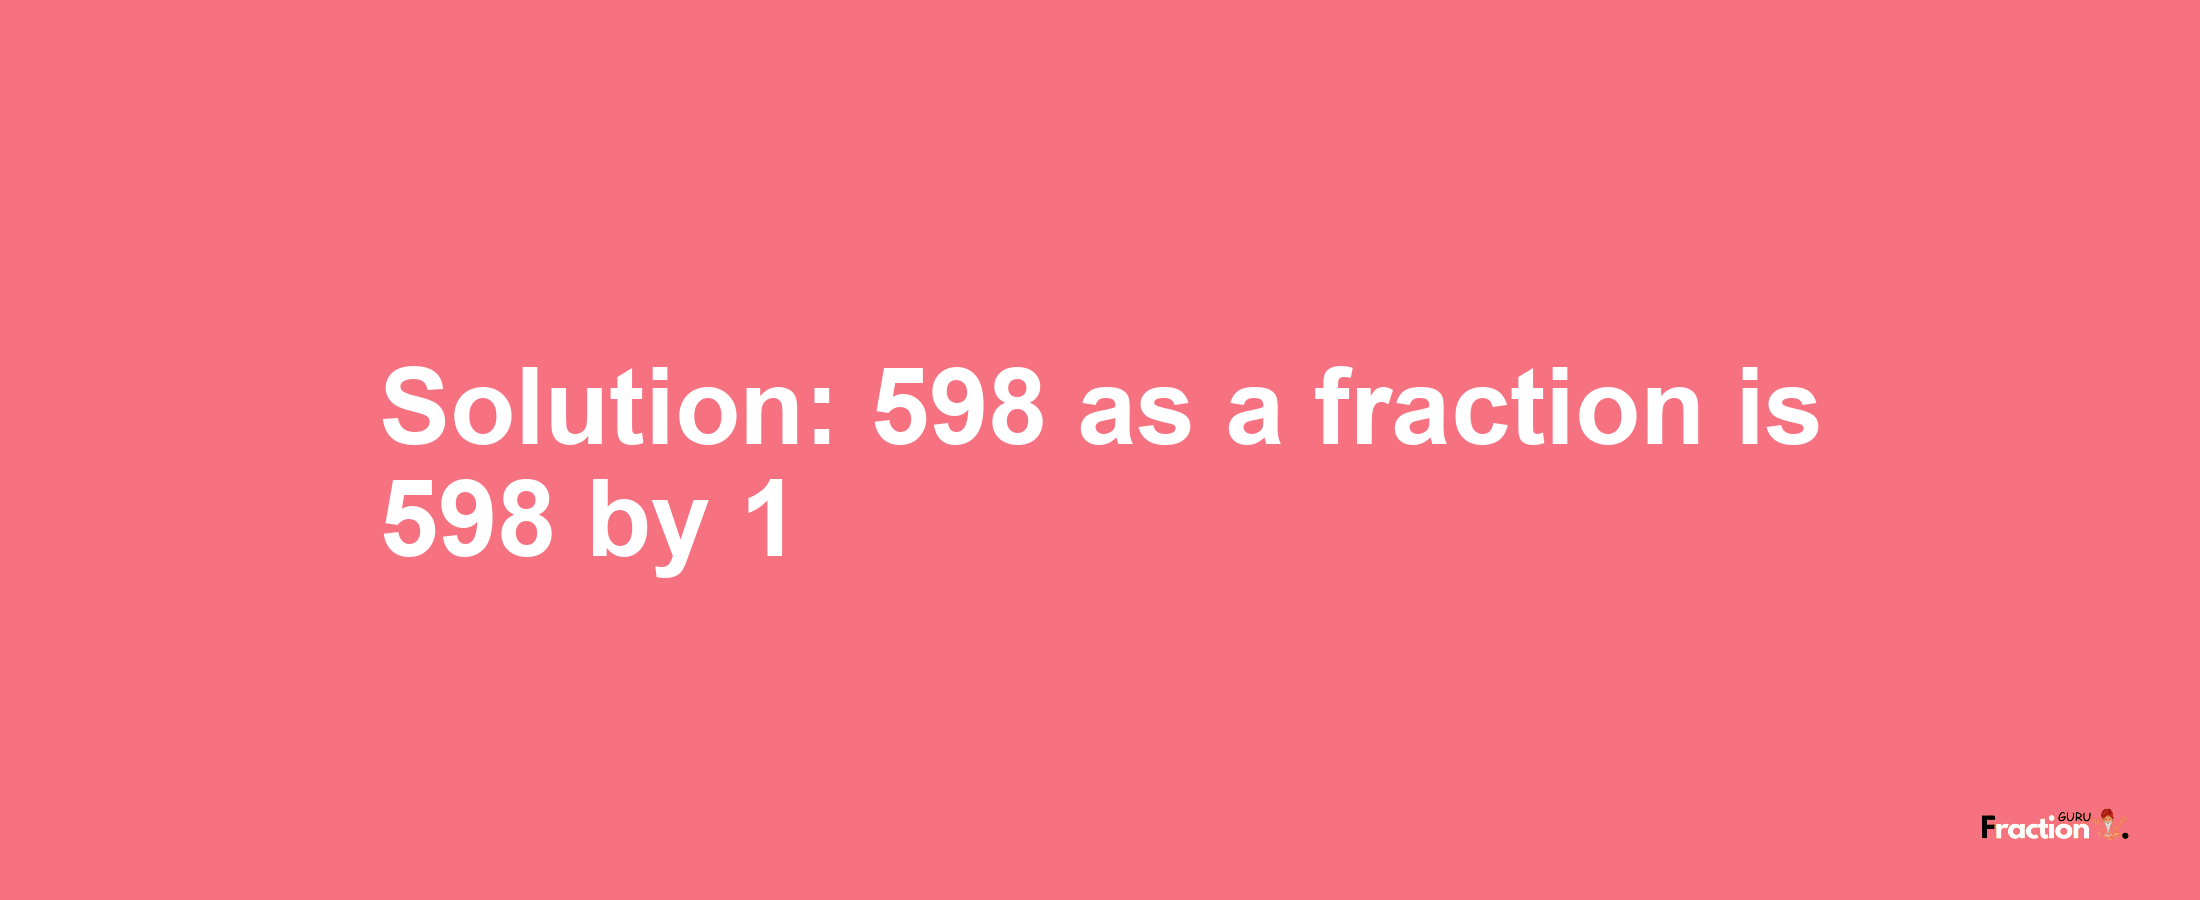 Solution:598 as a fraction is 598/1